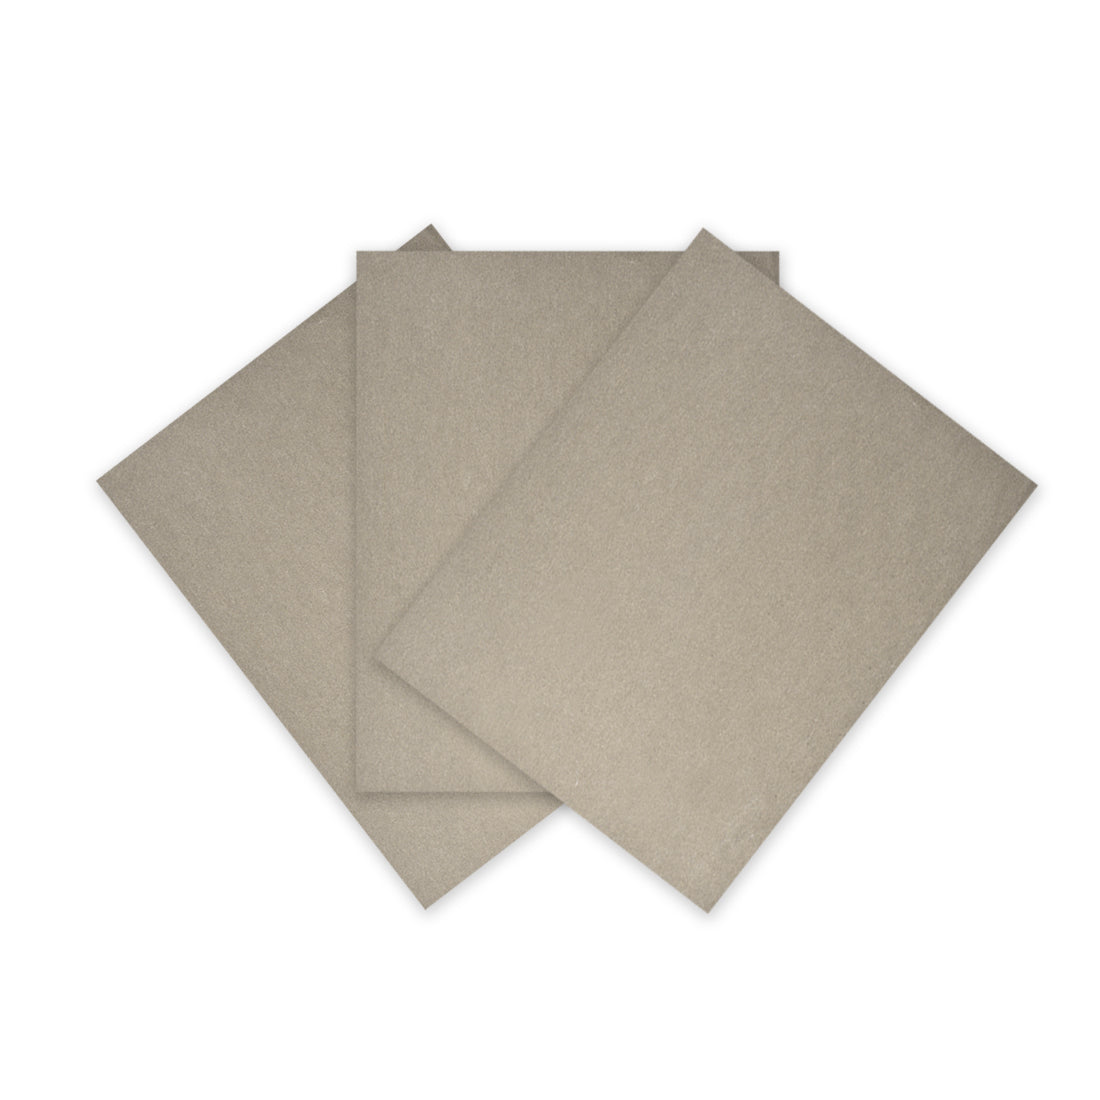 Uxcell Uxcell 3pcs 10000 Grits Wet Dry Waterproof Sandpaper 9" x 11" Abrasive Paper Sheets